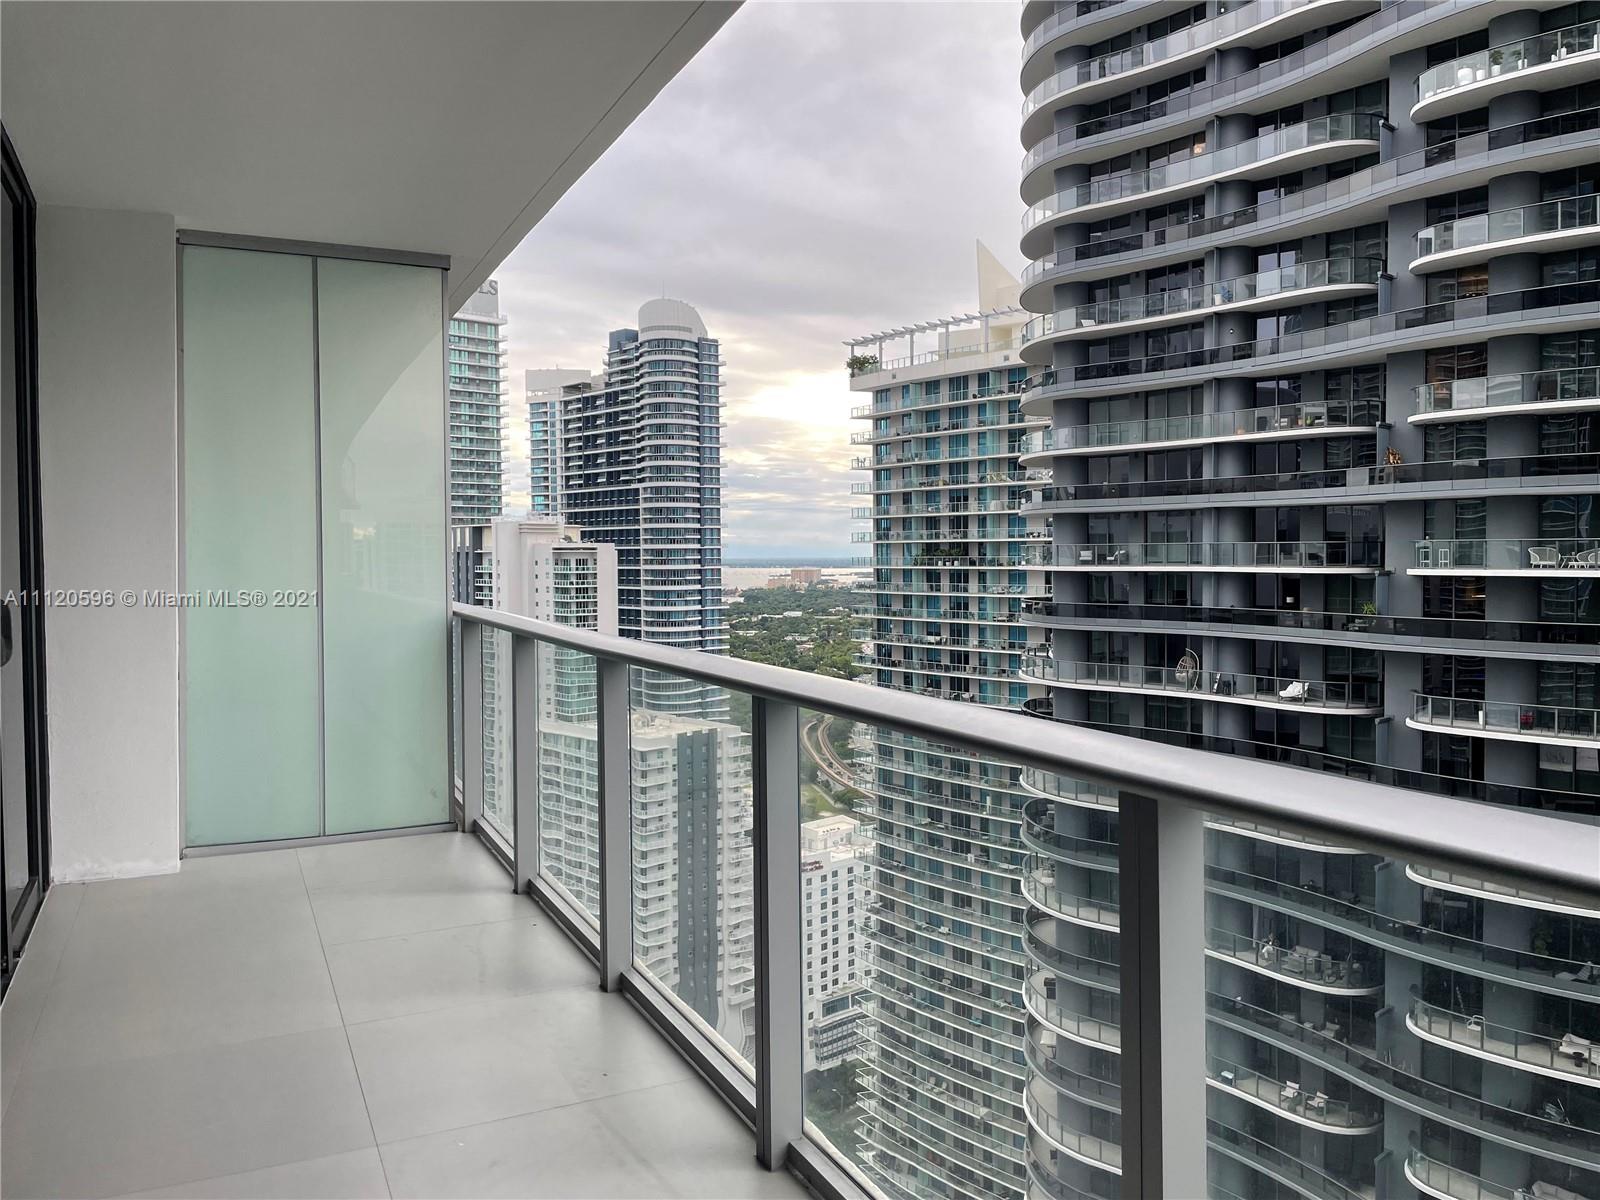 1 Bed 1 Full Bath + Half bathroom.  Desired building in the center of the financial district. Metro mover at your door steps. 1010 Brickell is the most complete amenities package in town, from Roof top pool with service to sports track around the building. Amazing Spa, lap pool, Squash and basketball courts, Gym, game room and much more to mention.